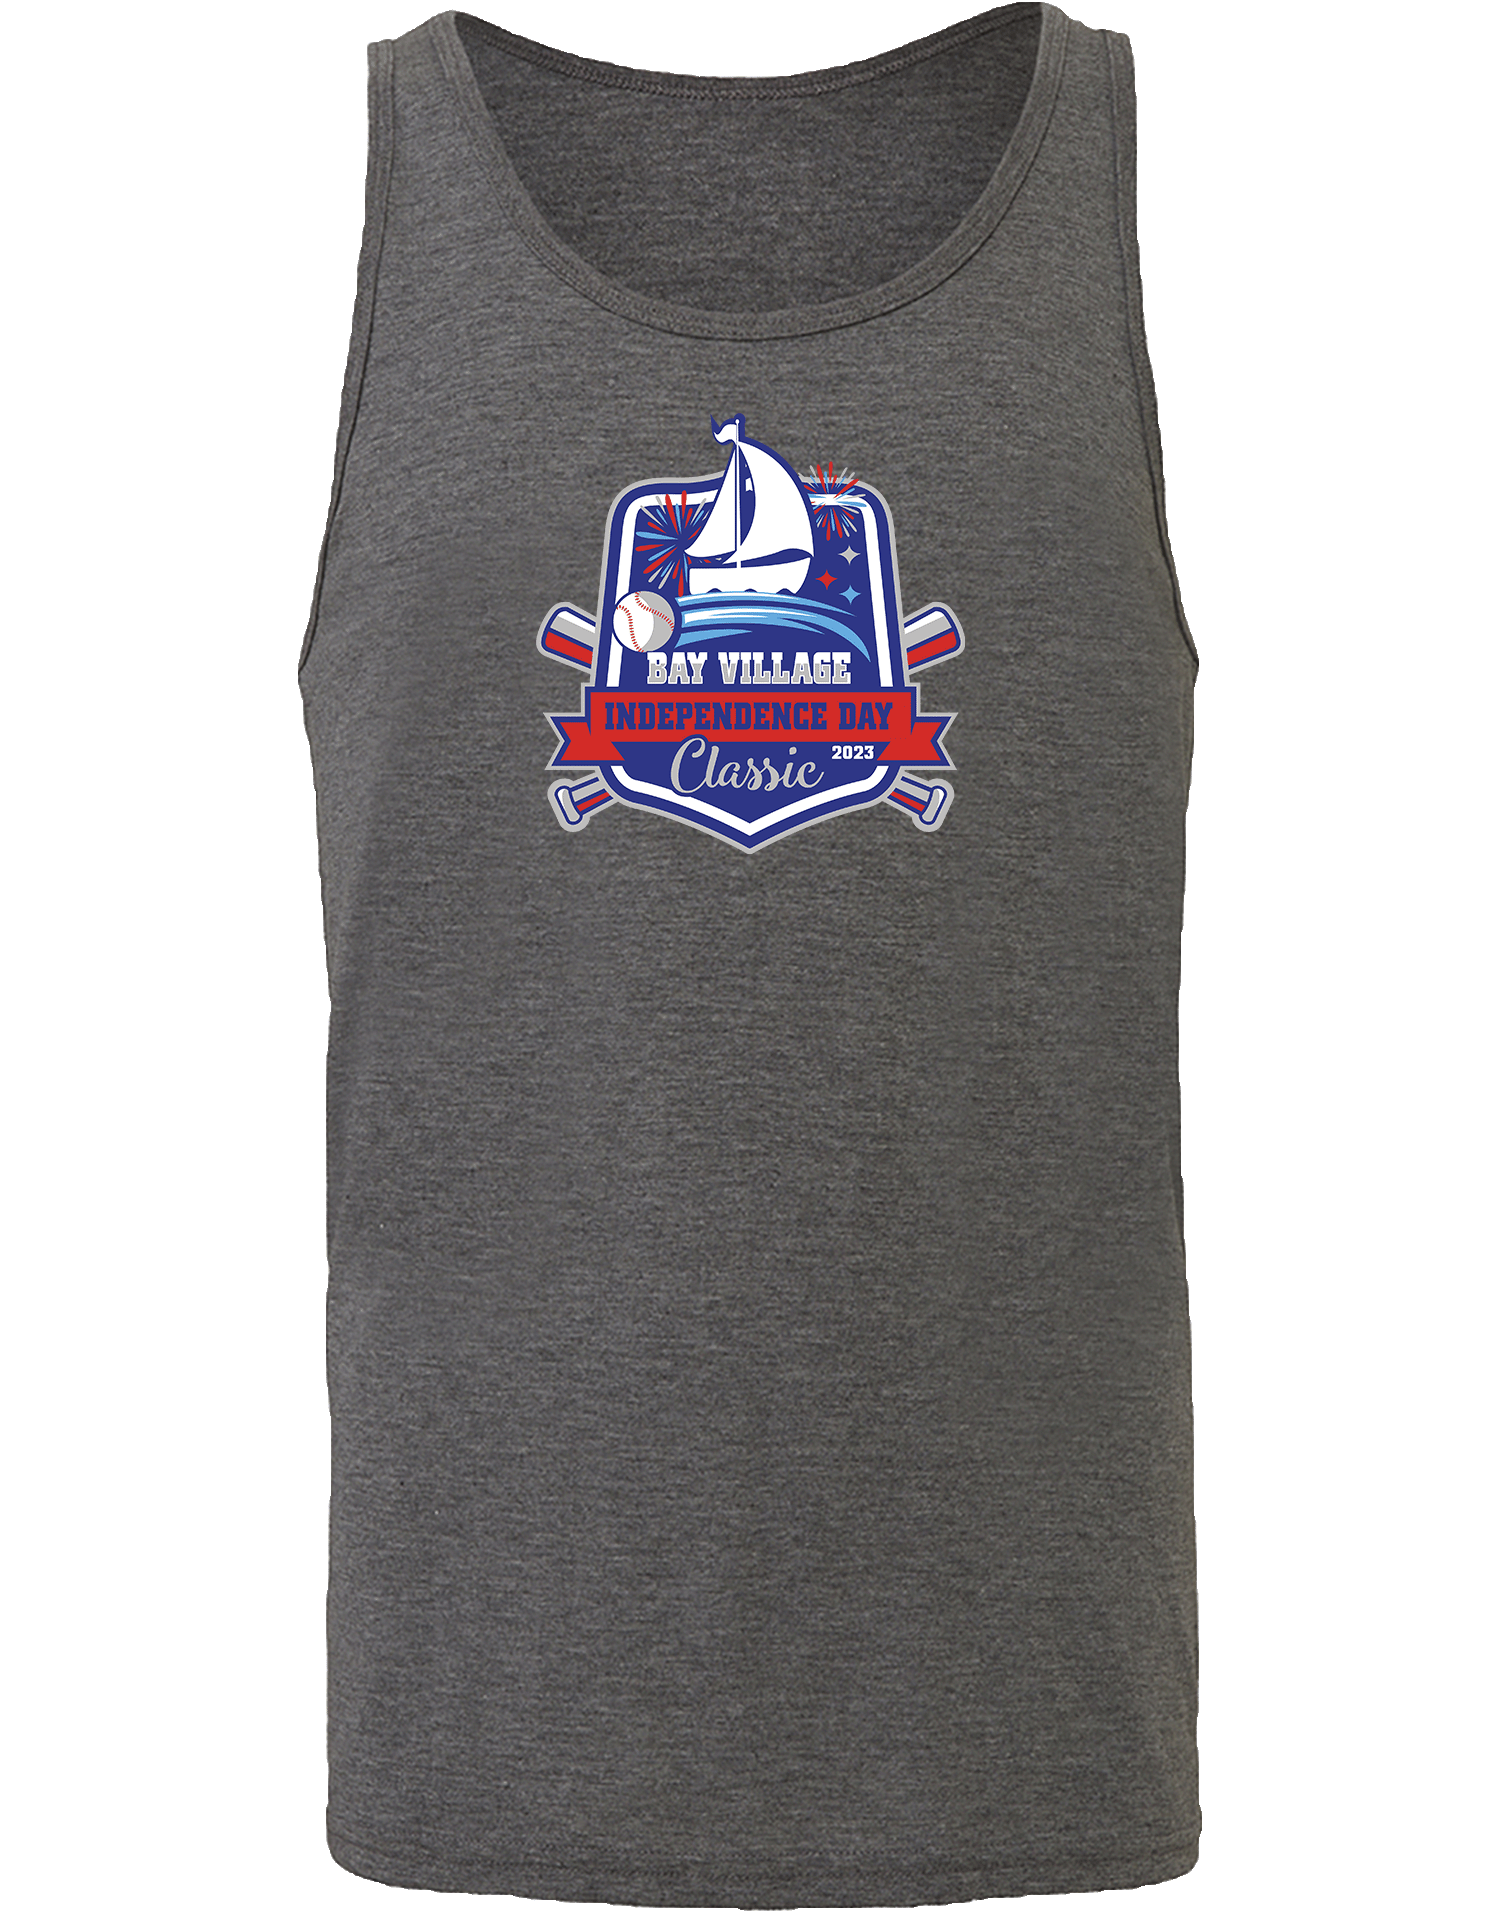 TANK TOP - 2023 Bay Village Independence Day Classic